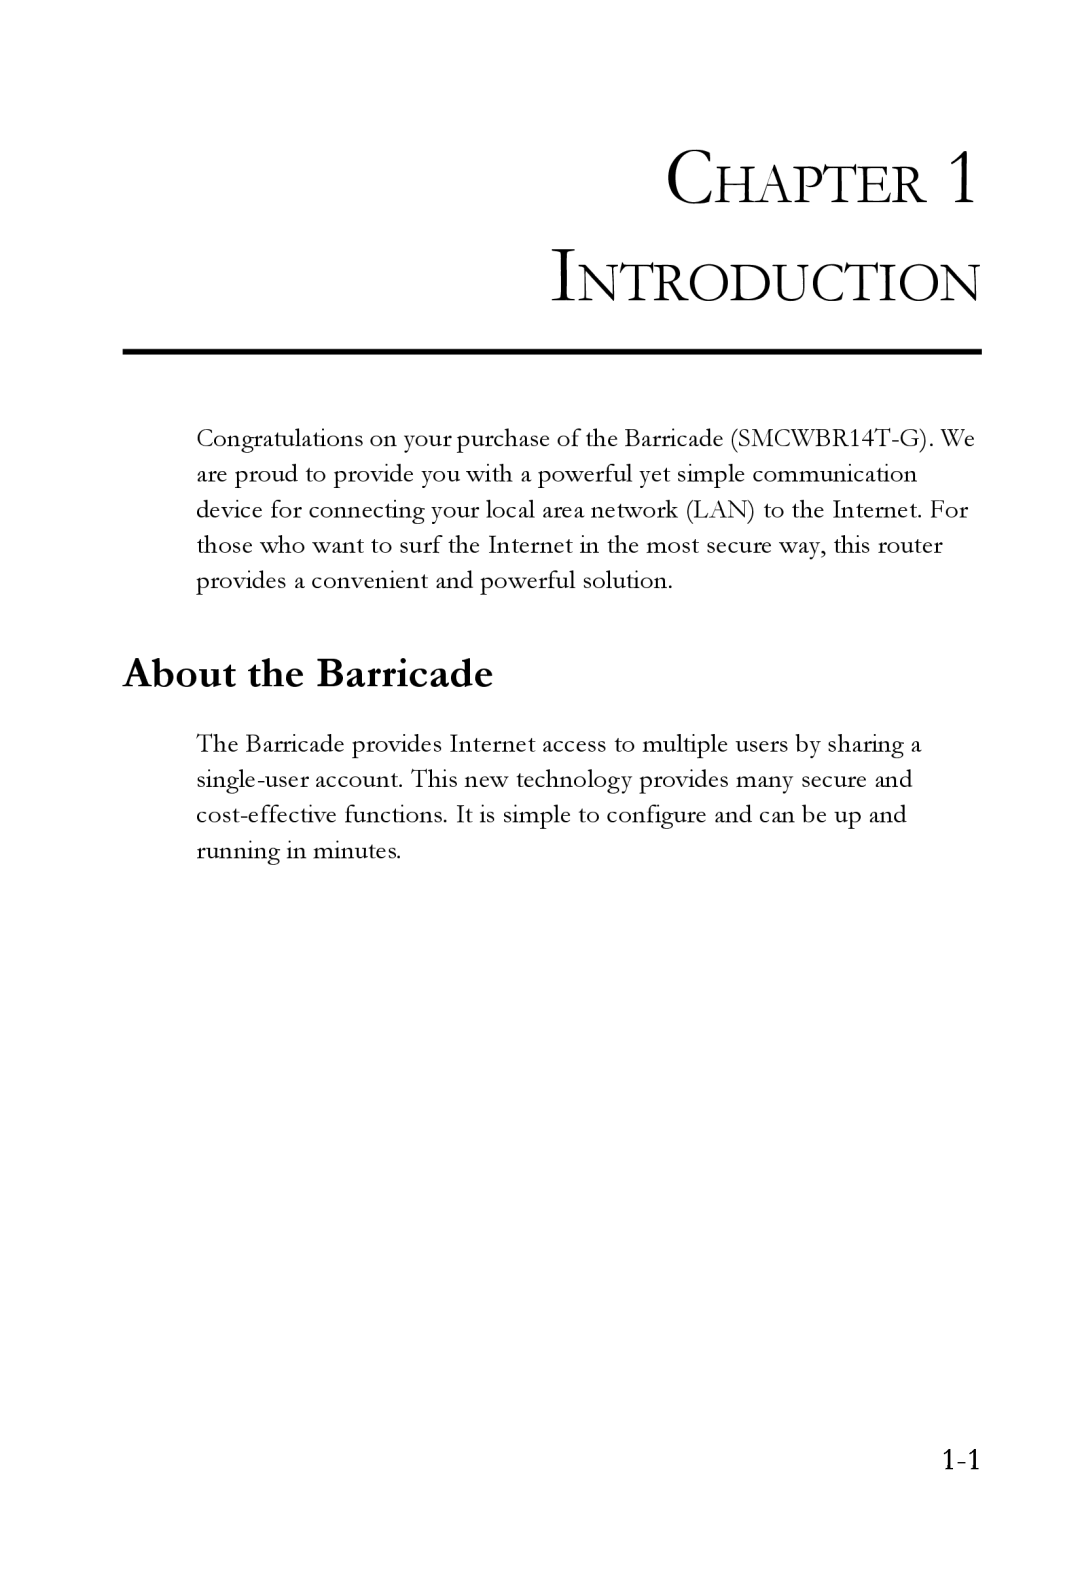 SMC Networks SMCWBR14T-G manual Chapter Introduction, About the Barricade 